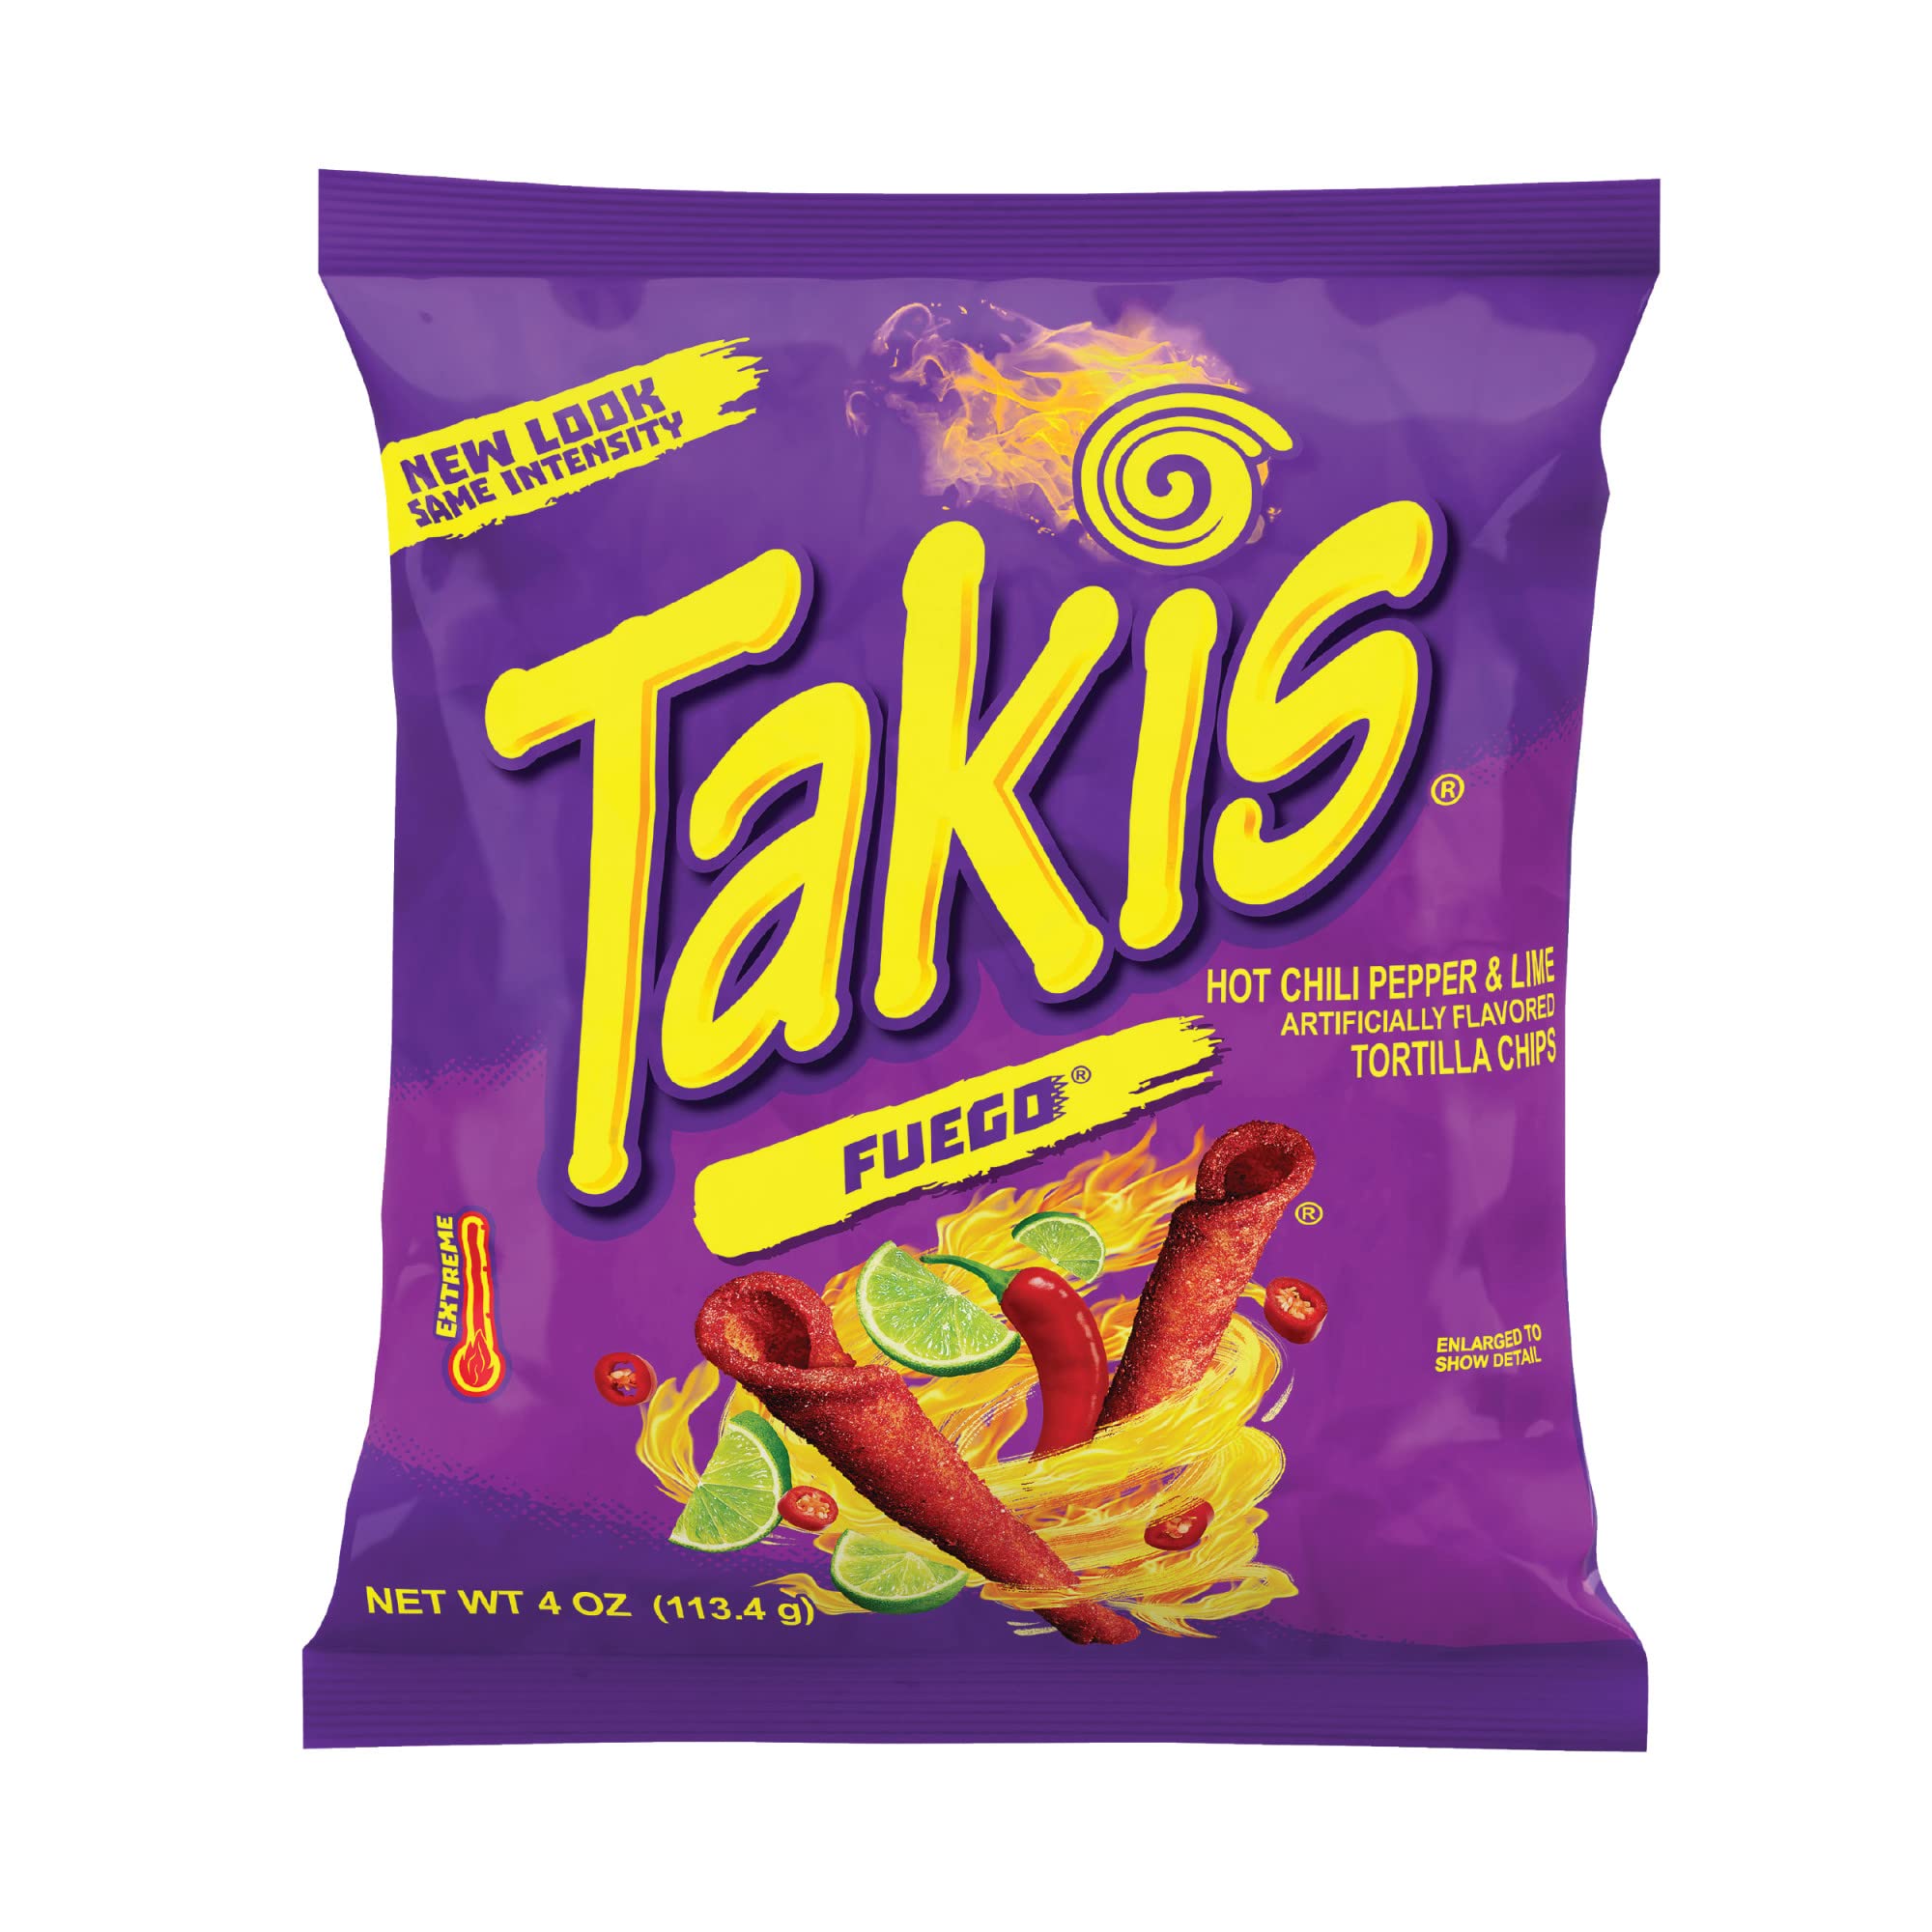 how many takis are in a bag